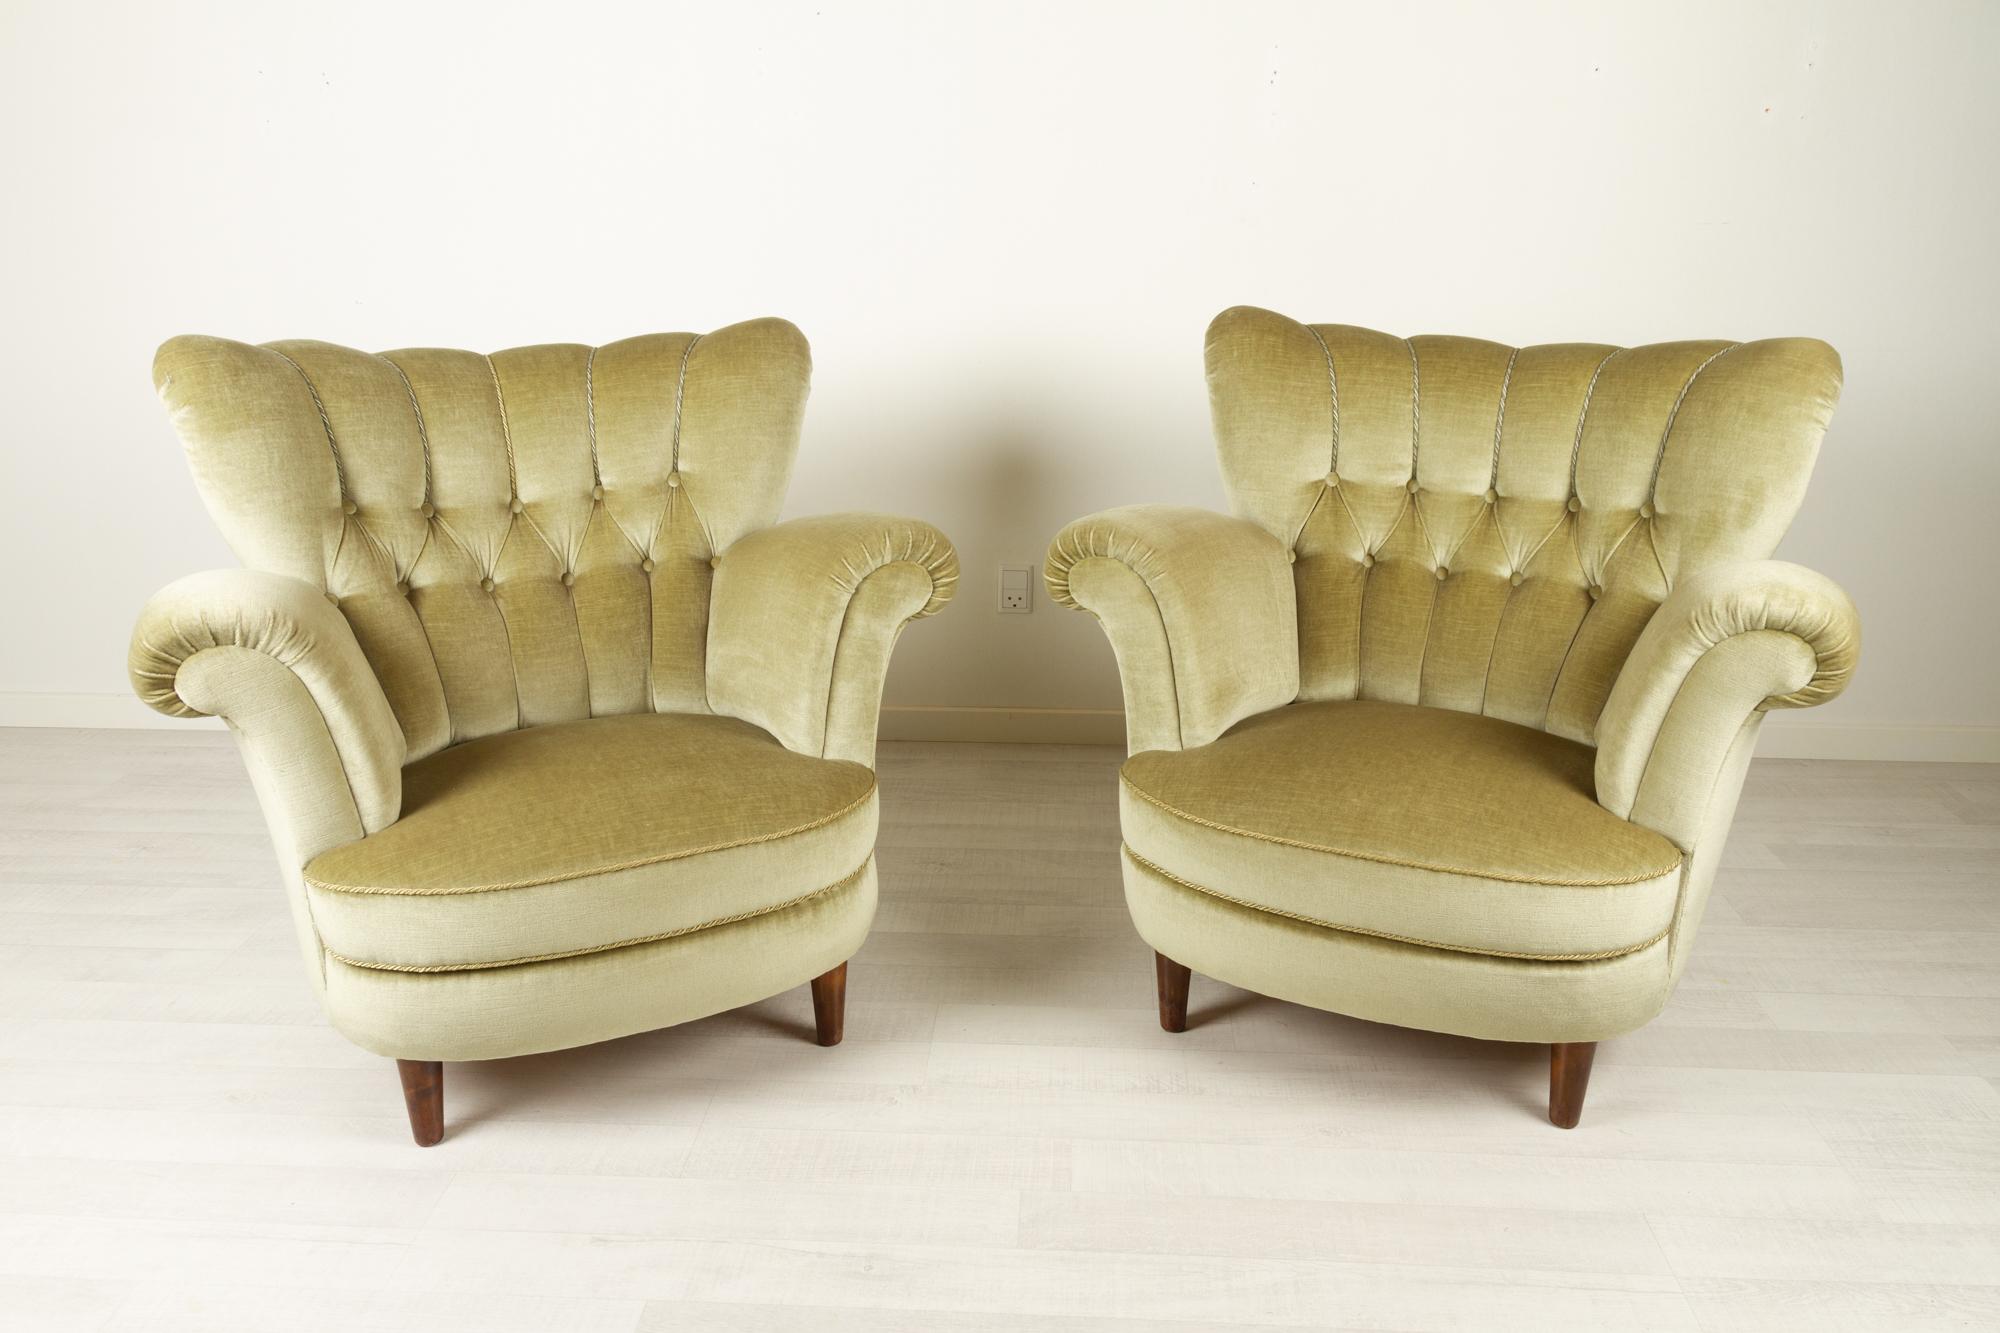 Danish Velour wingback lounge chairs 1940s, Set of 2
Stunning pair of vintage Danish wingback chairs in delicate green velvet upholstery. Very comfortable with a deep seat and wide curved clamshell back. 
Extremely good original condition. Seat